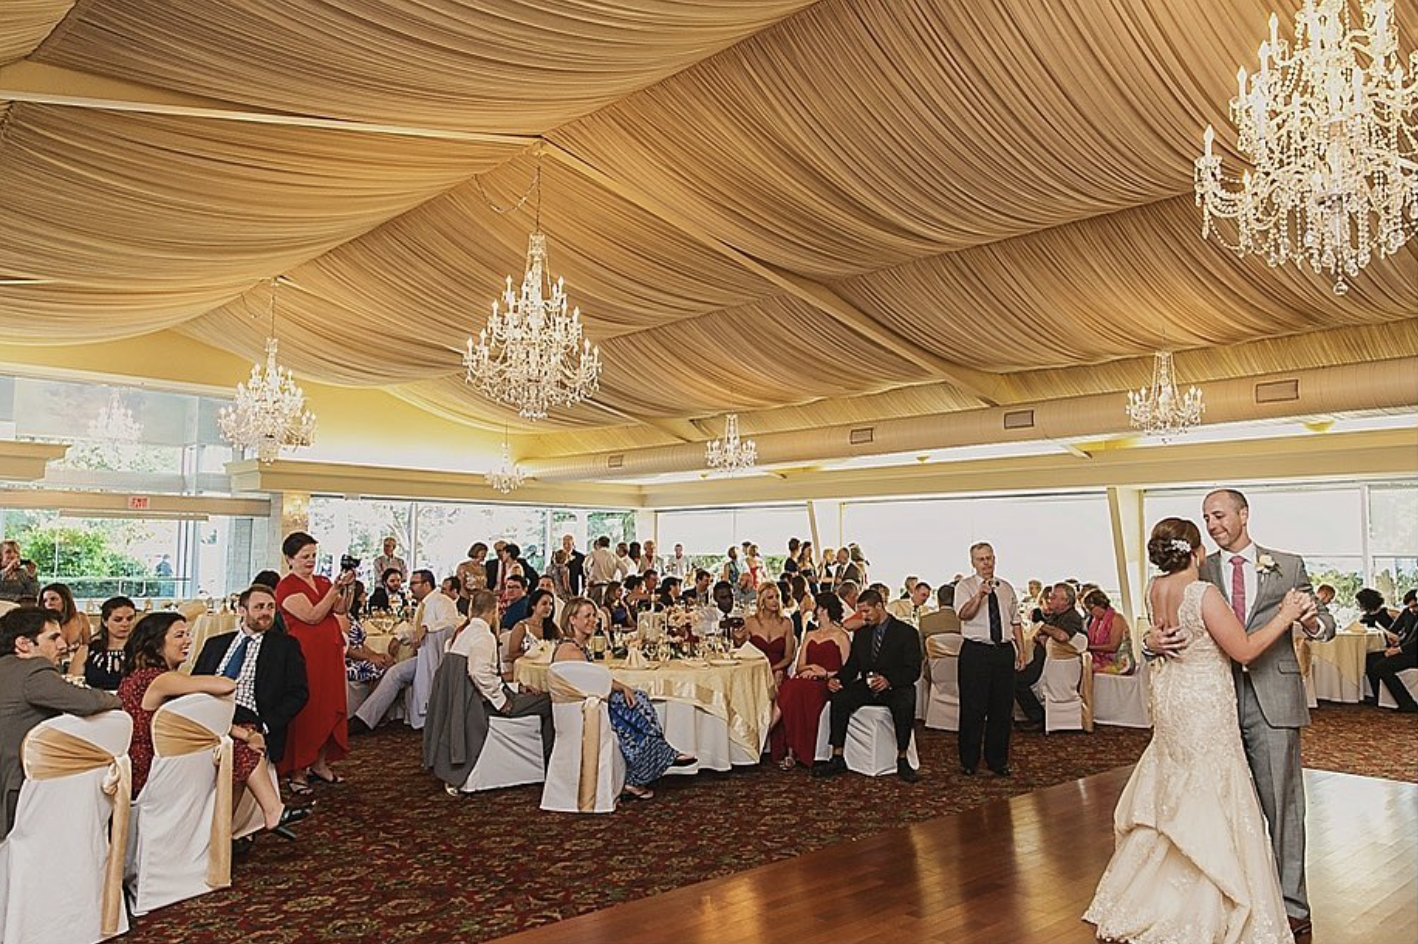 Bride and groom have first dance as married couple